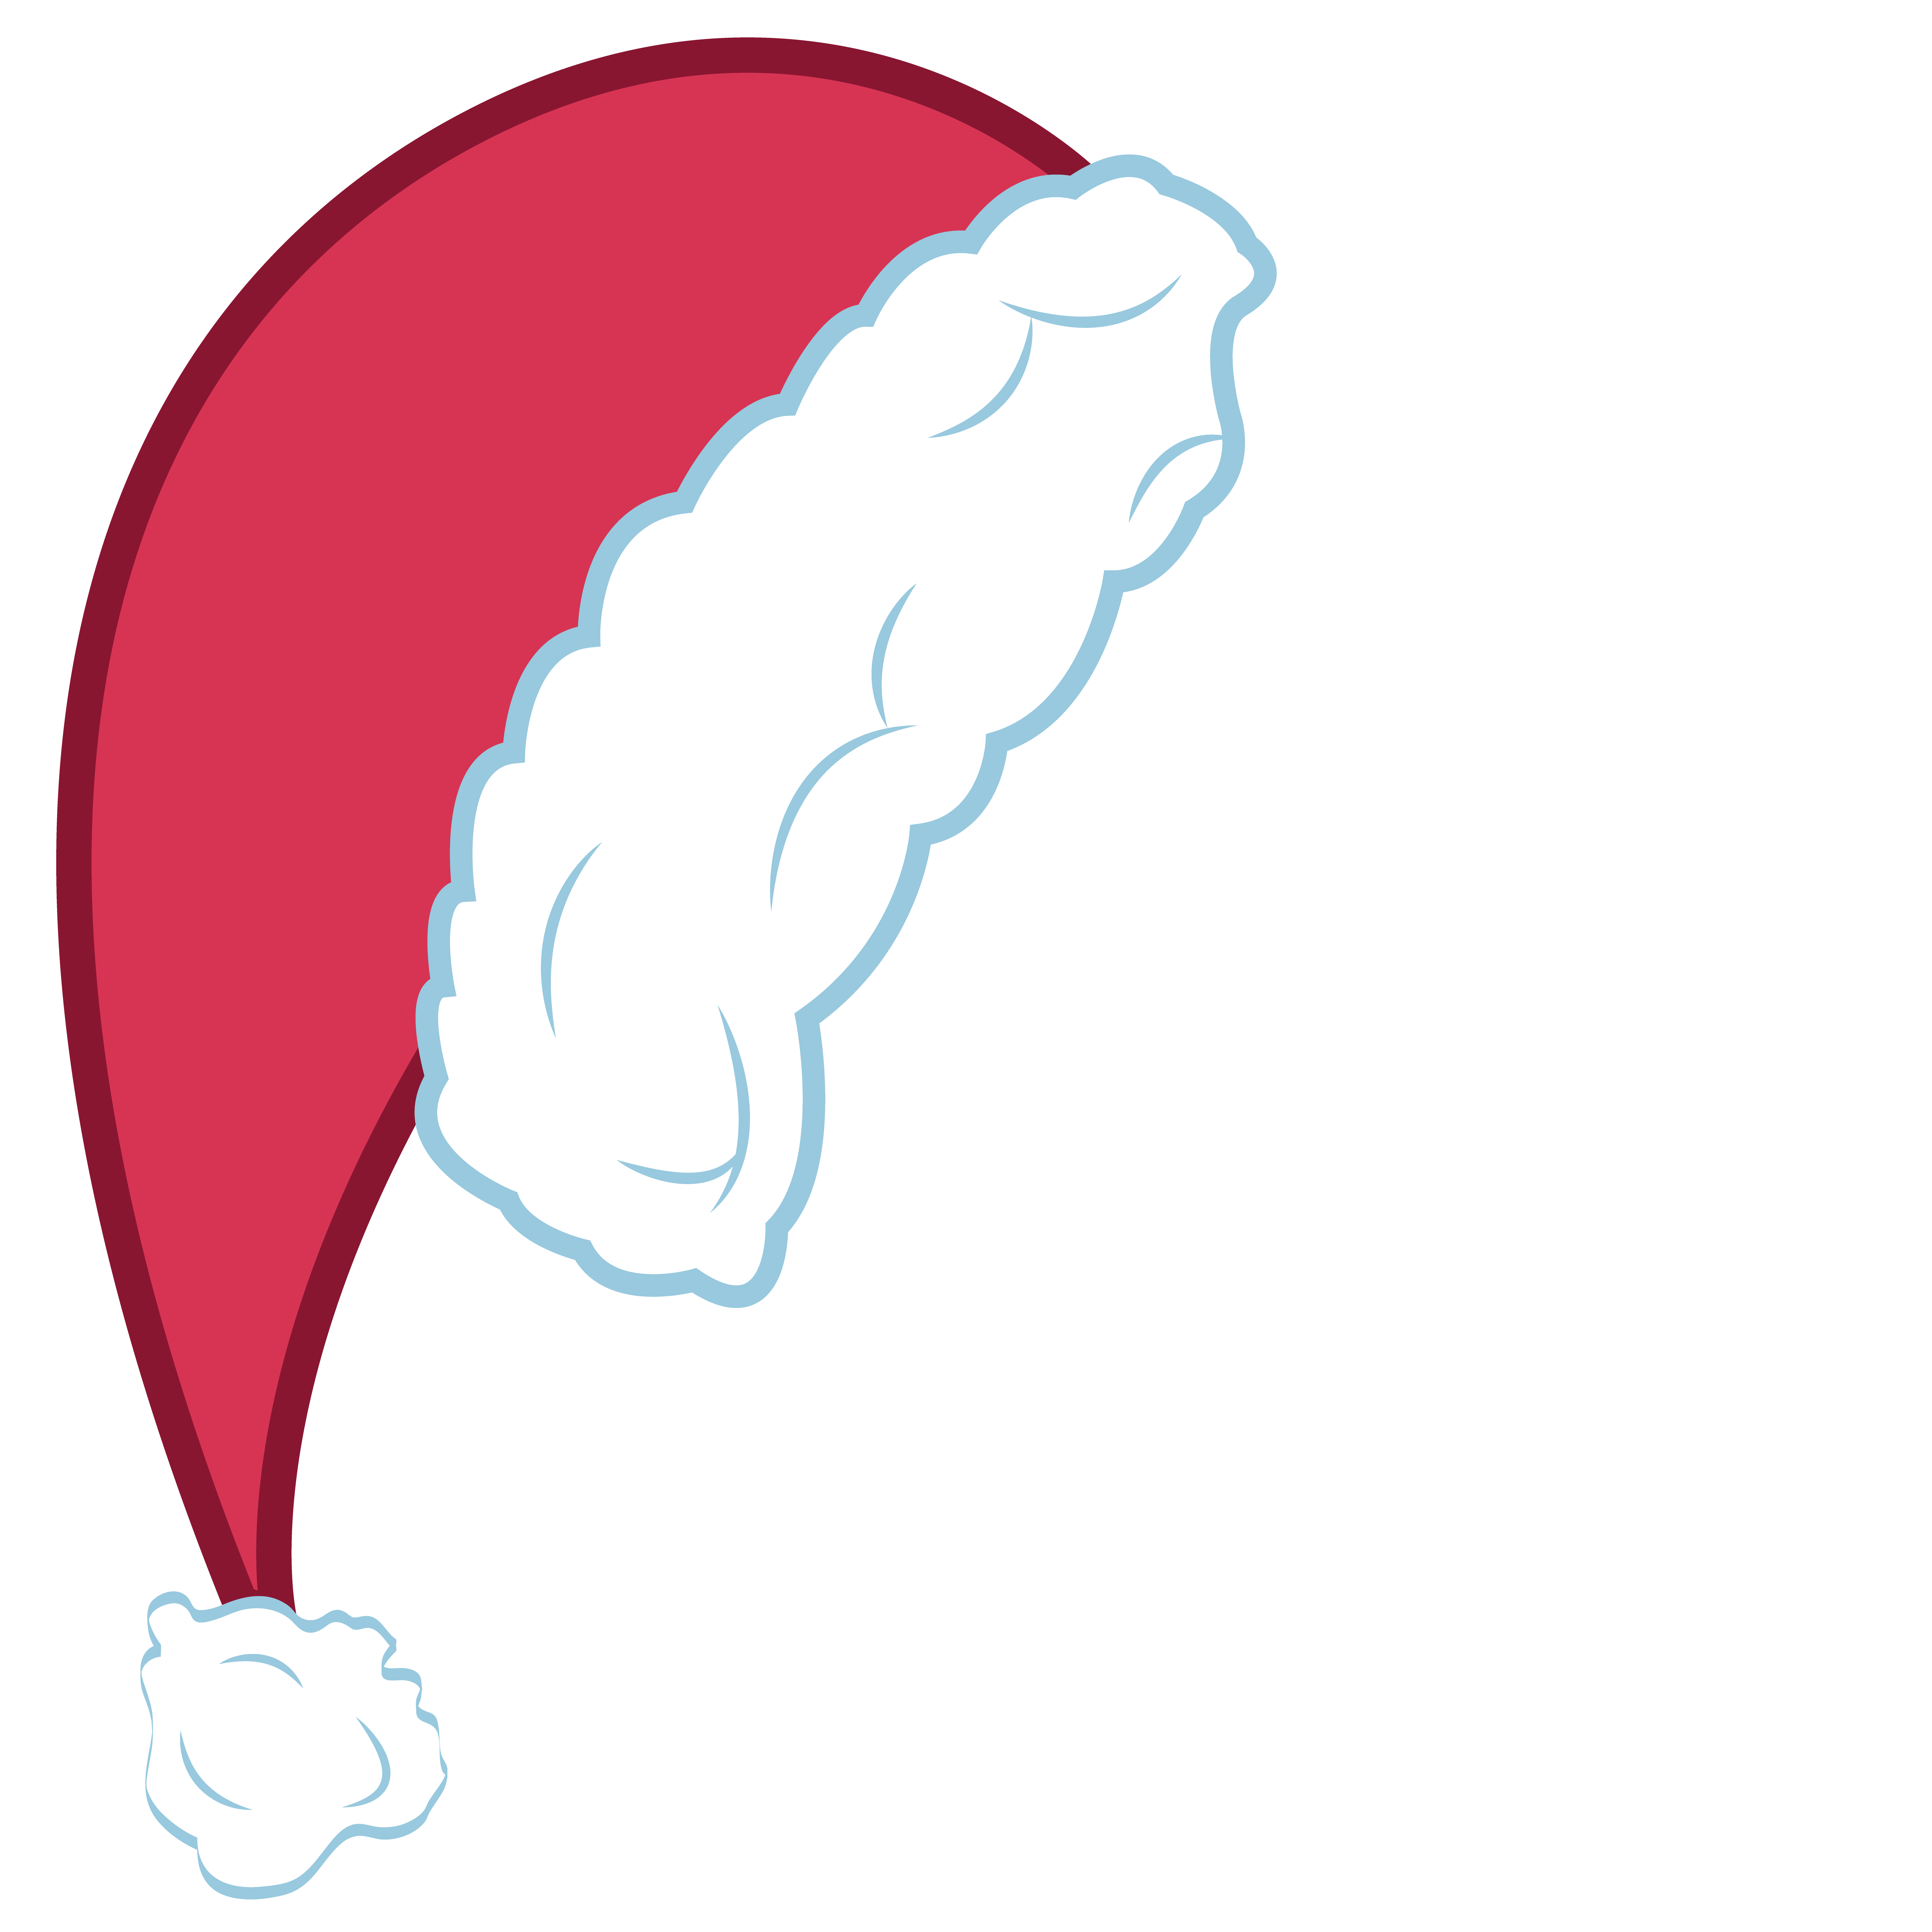 santa hat clipart with transparent background - photo #48